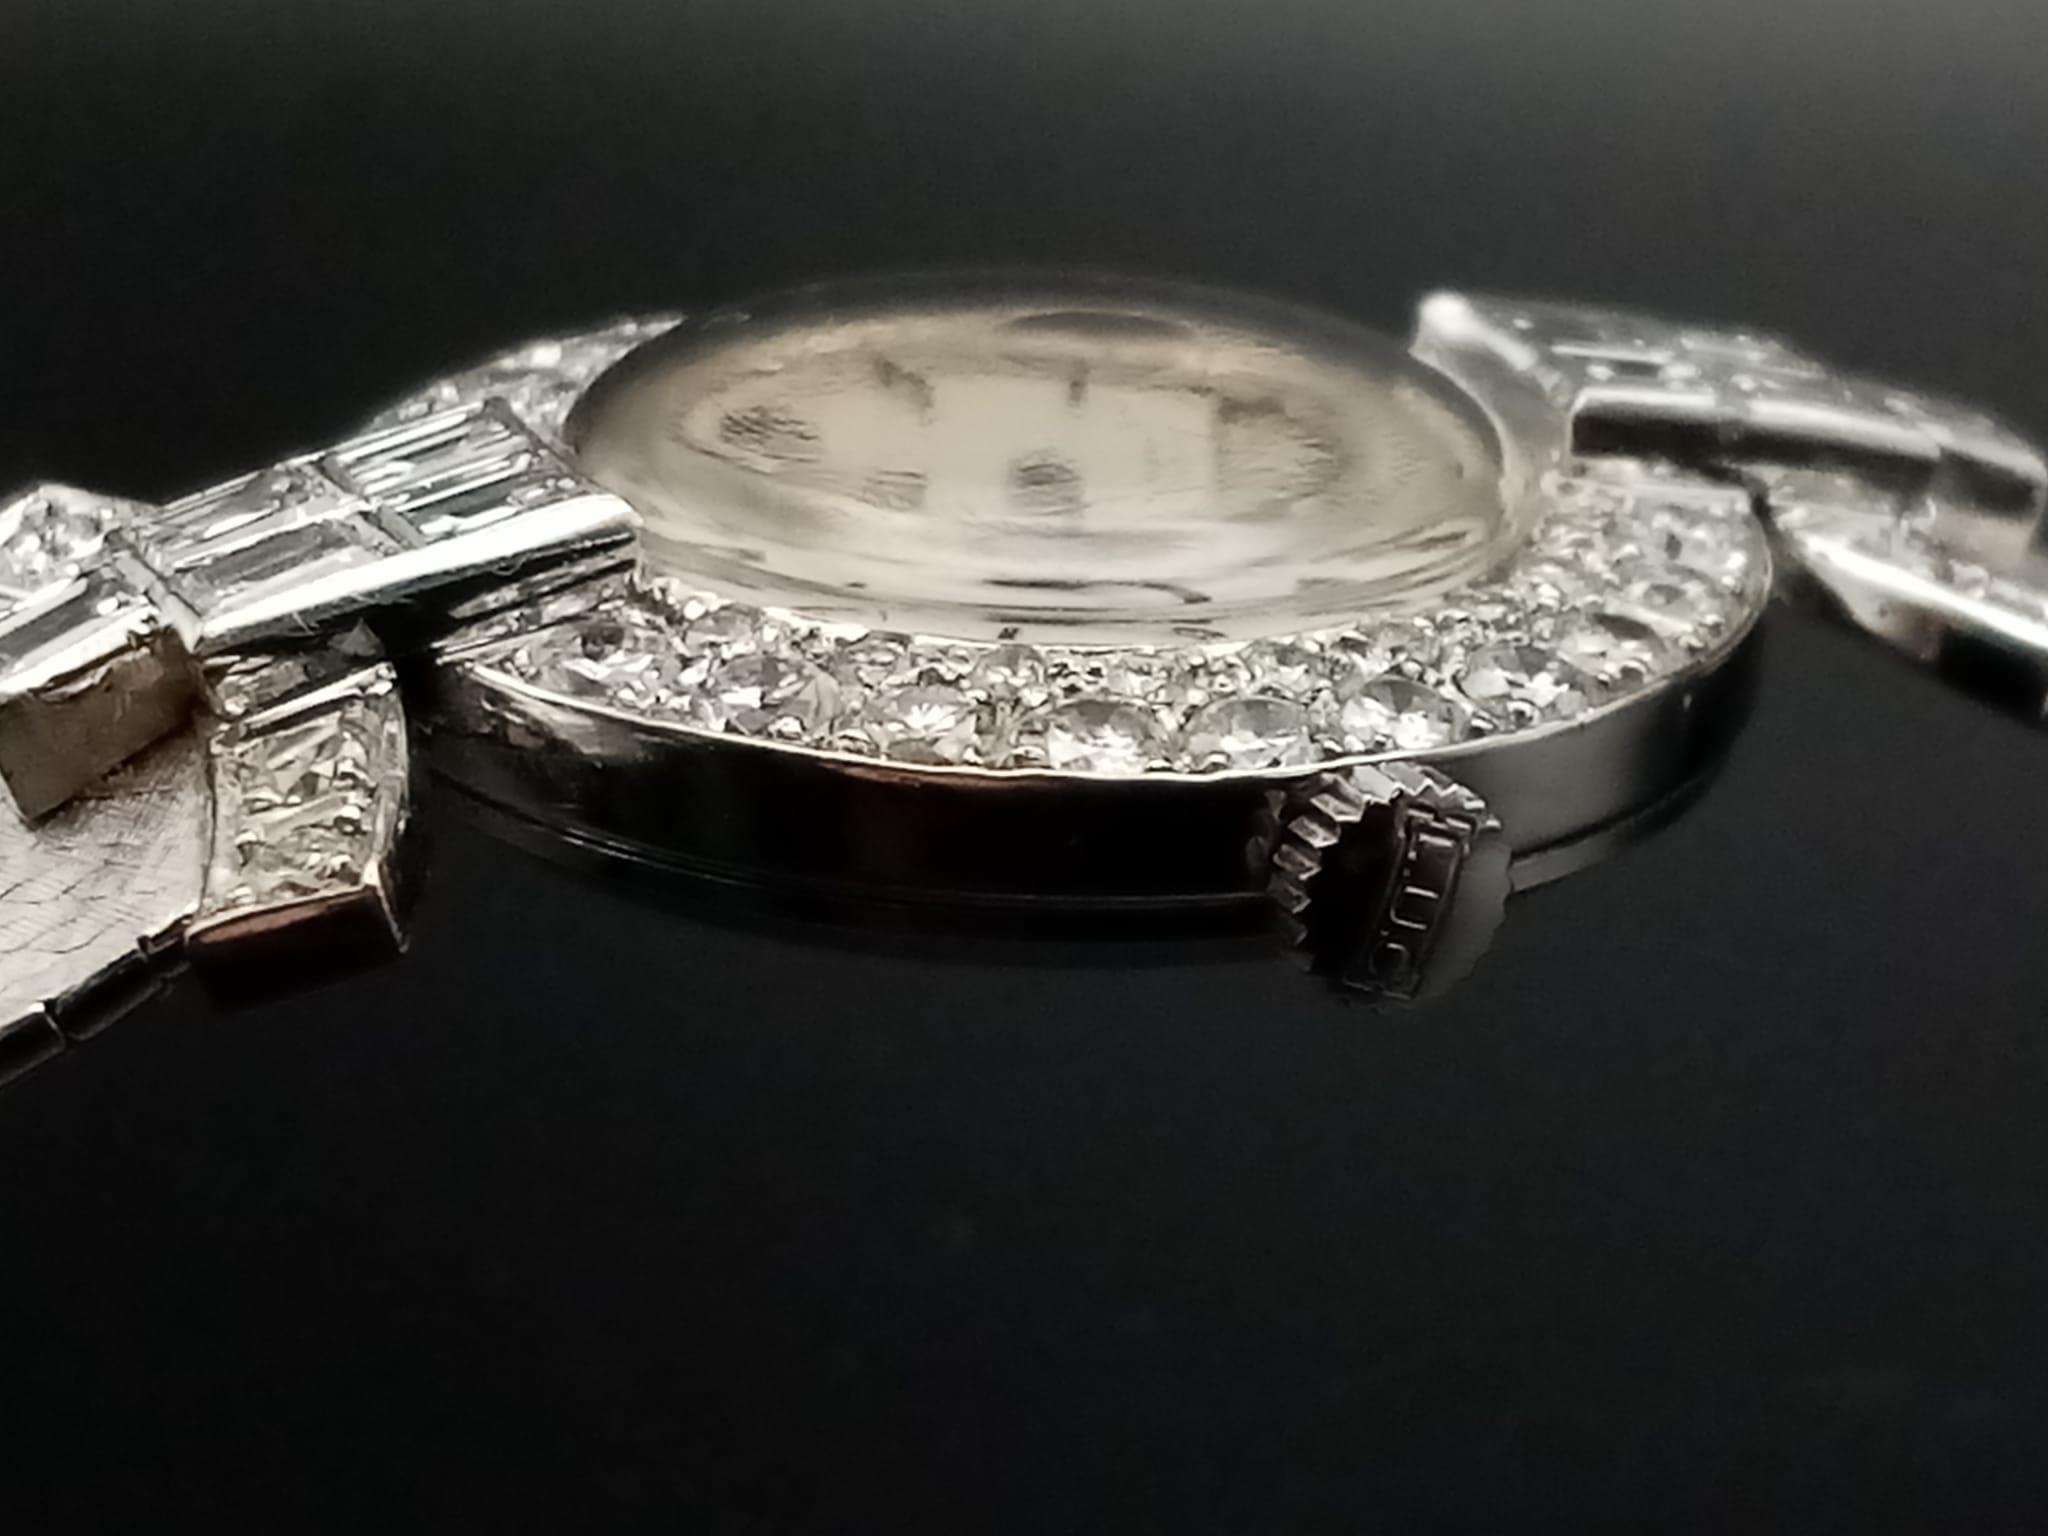 A Chopard 18K White Gold and Diamond Ladies Watch. White gold strap and case - 25mm diameter. - Image 9 of 10